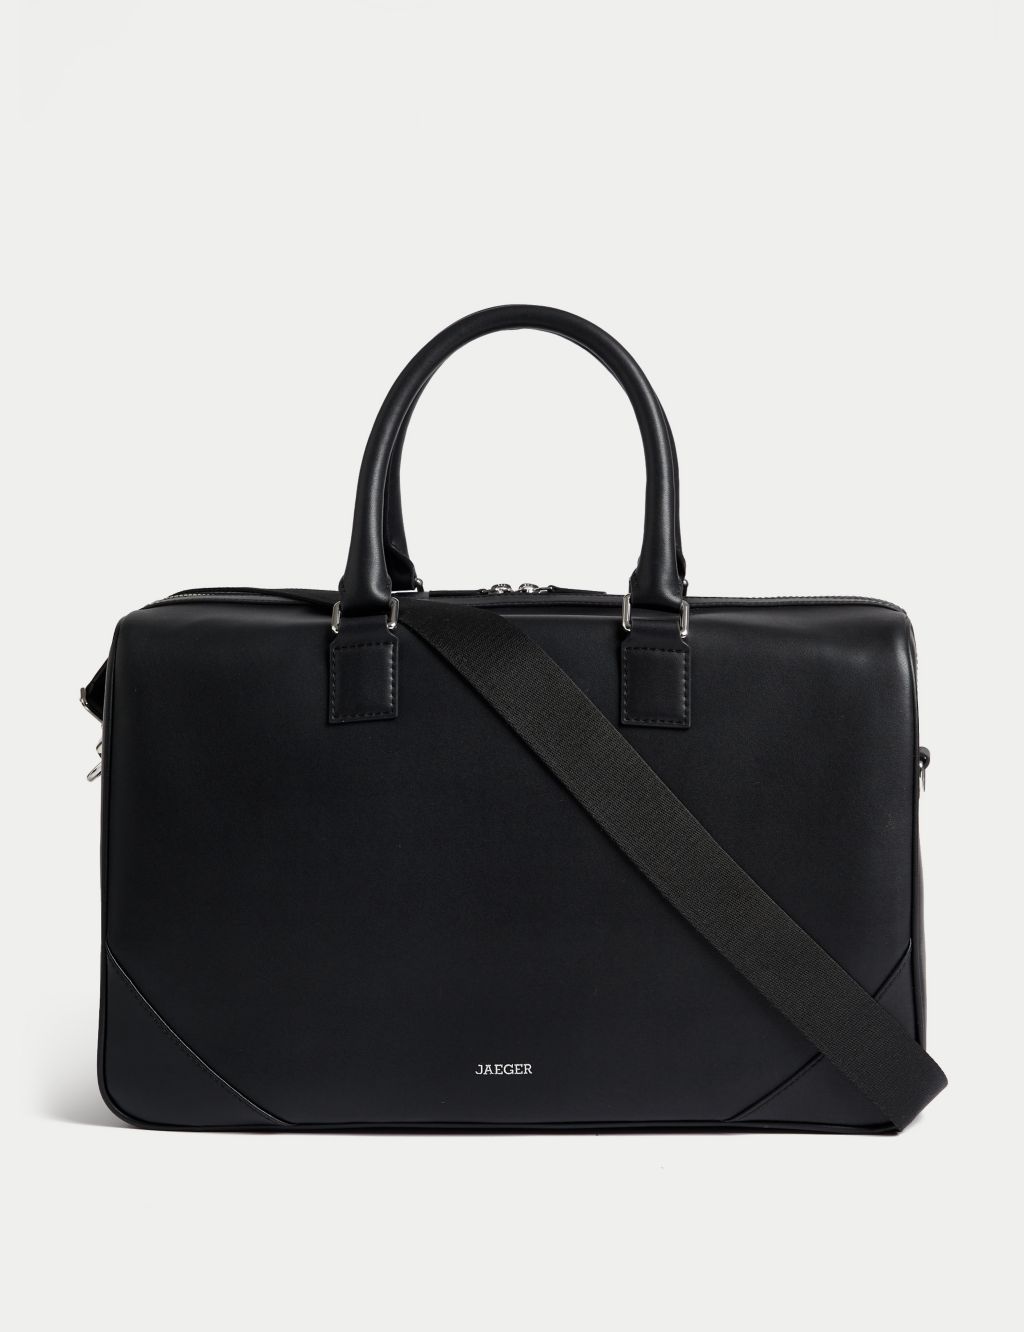 Men’s Leather Bags | M&S